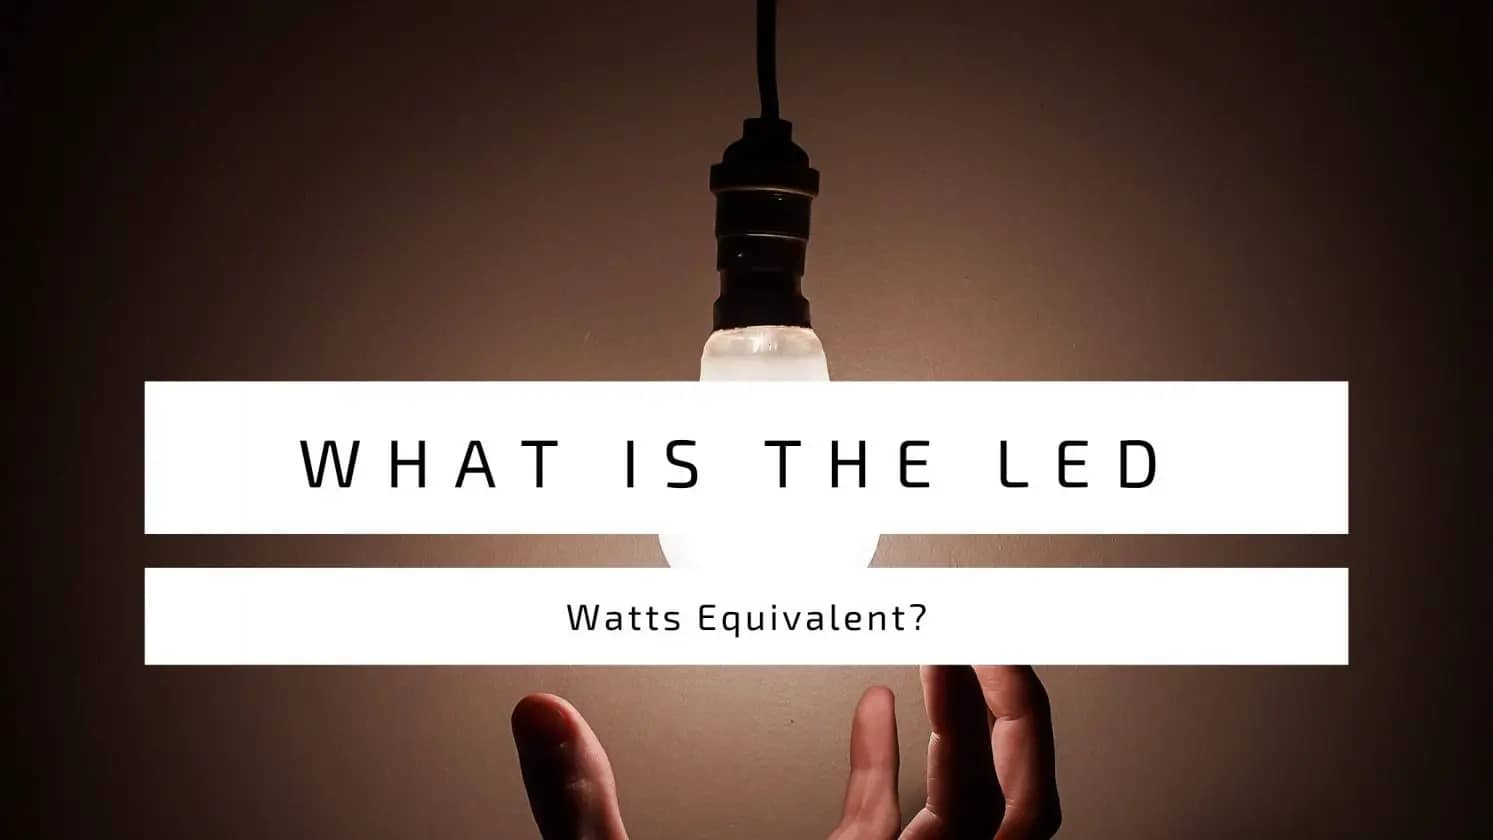 What Is The LED Watts Equivalent?